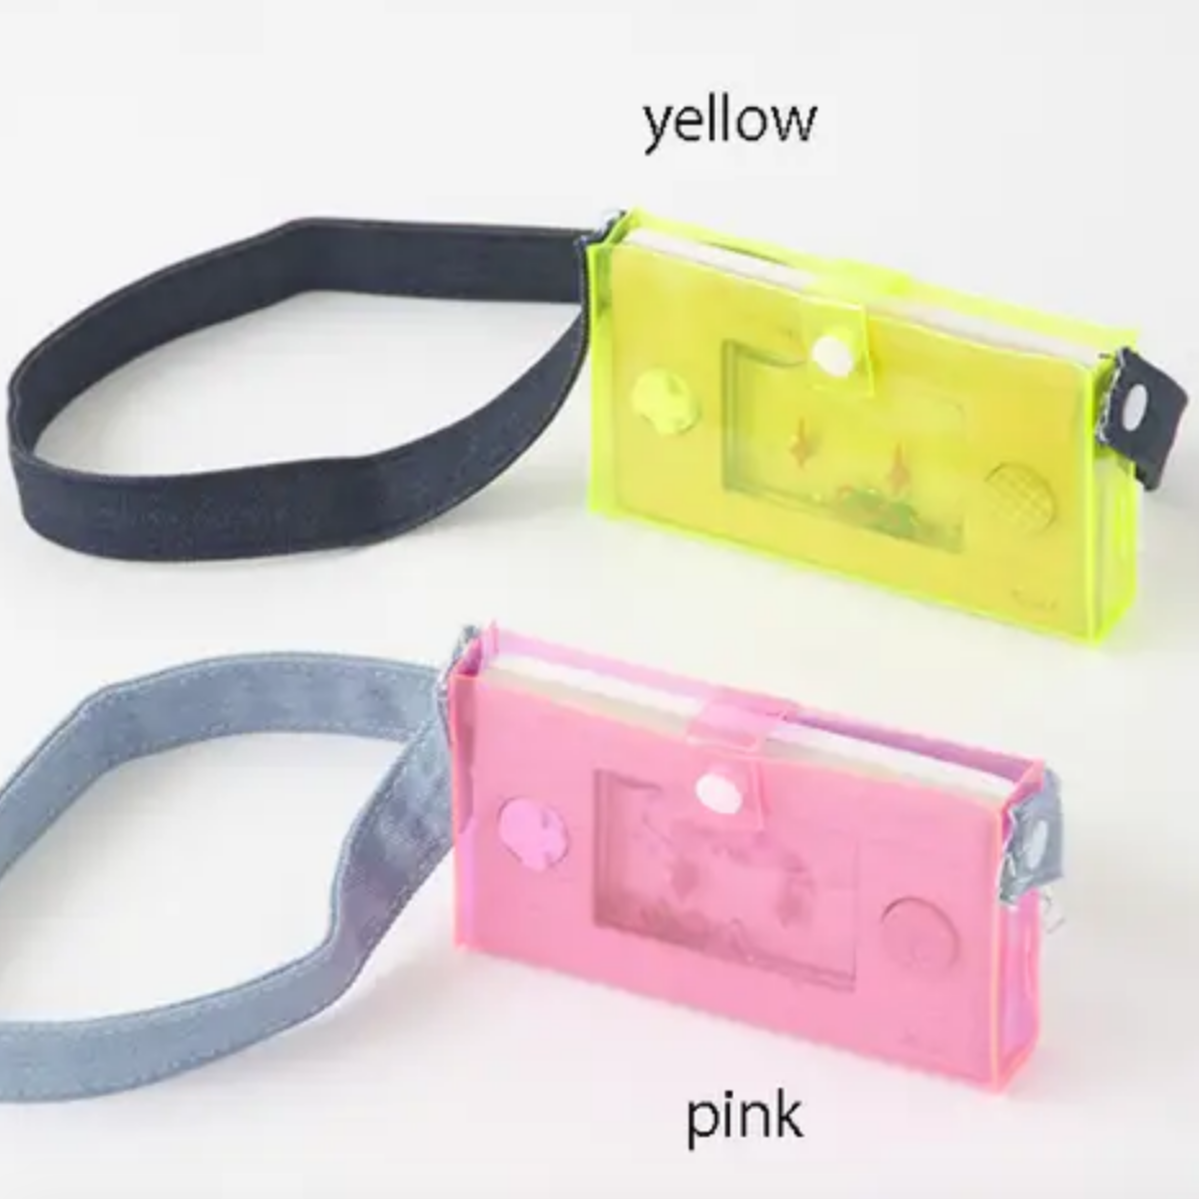 transparent yellow case and pink case